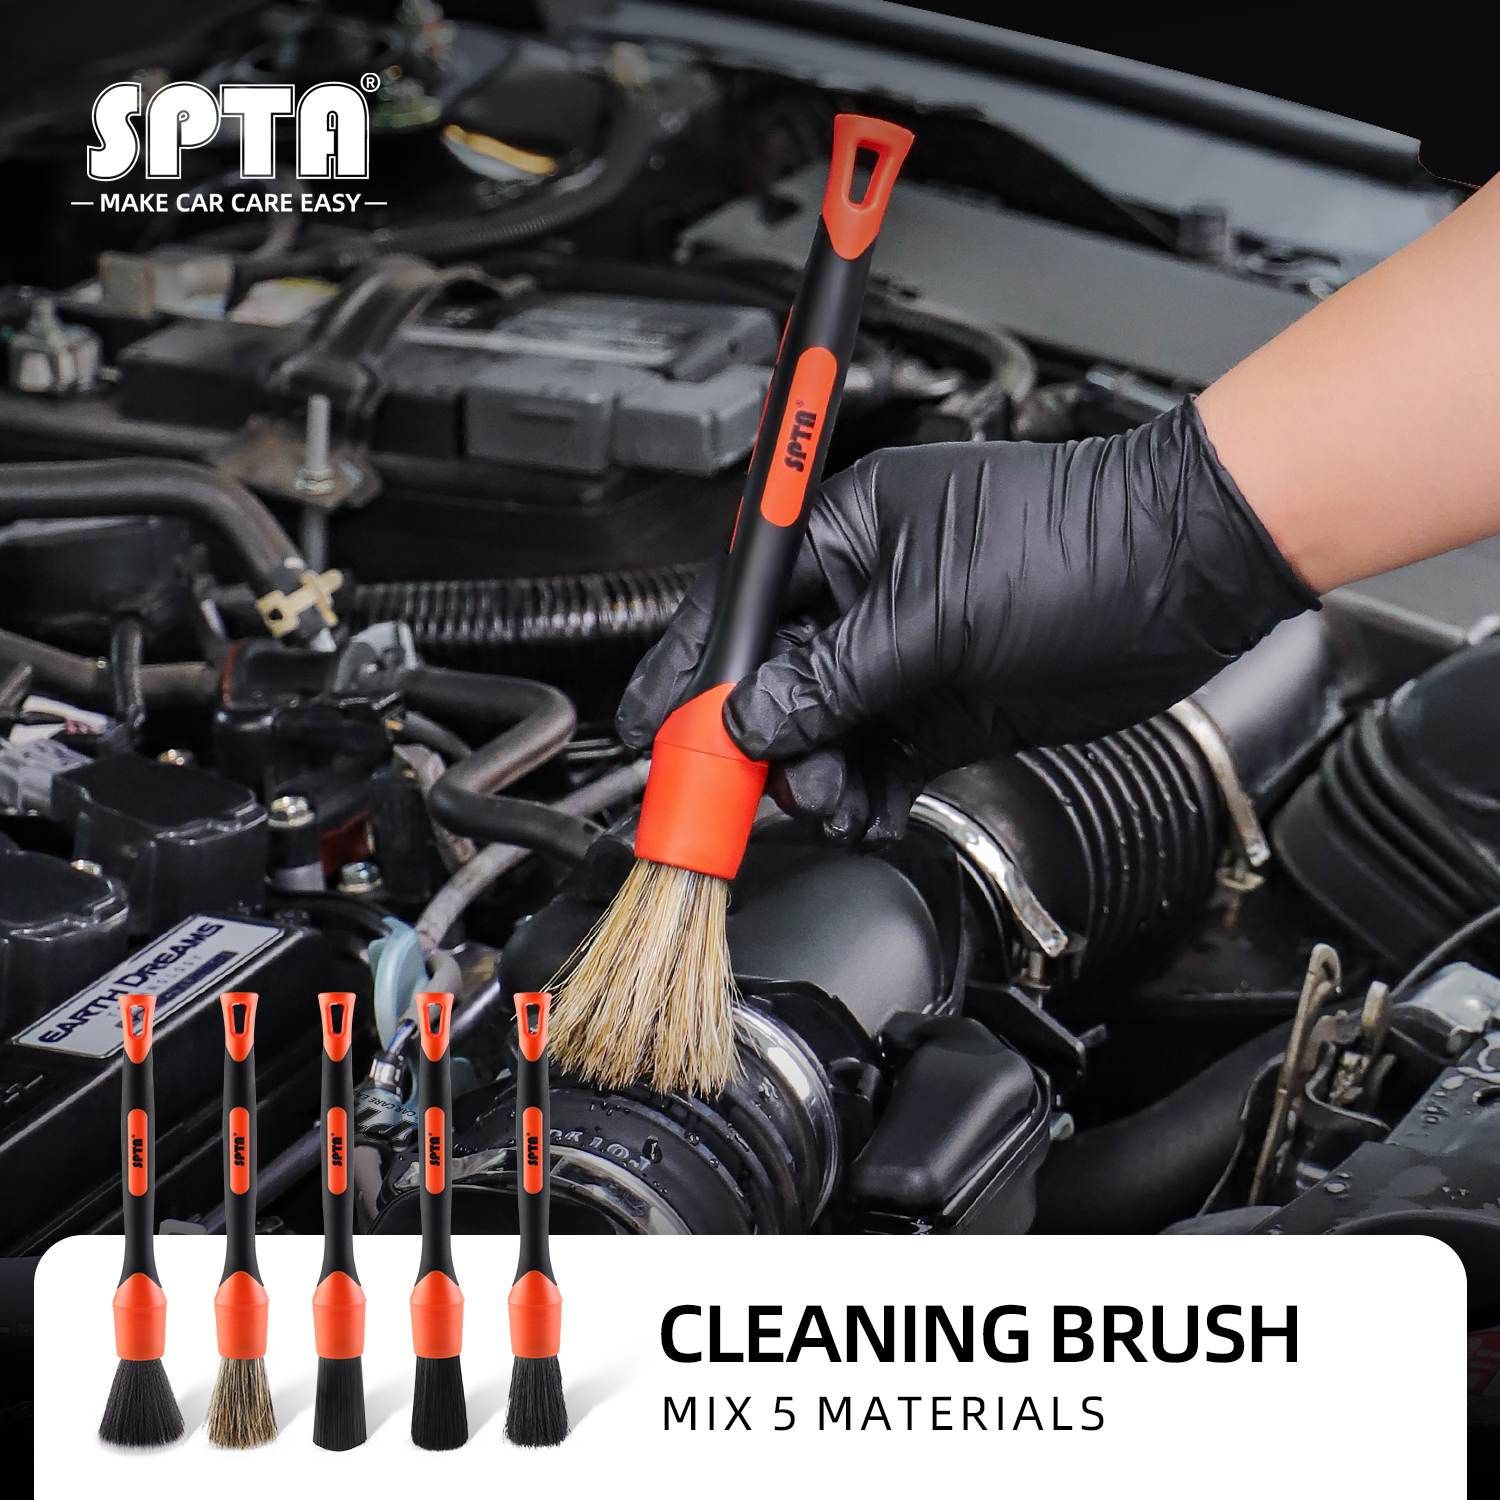 SPTA Car Detailing Brush Mix 5 Materials Brush Set With Detachable Elbow Conversion For Air Vents Engine Bays Dashboard & Wheels